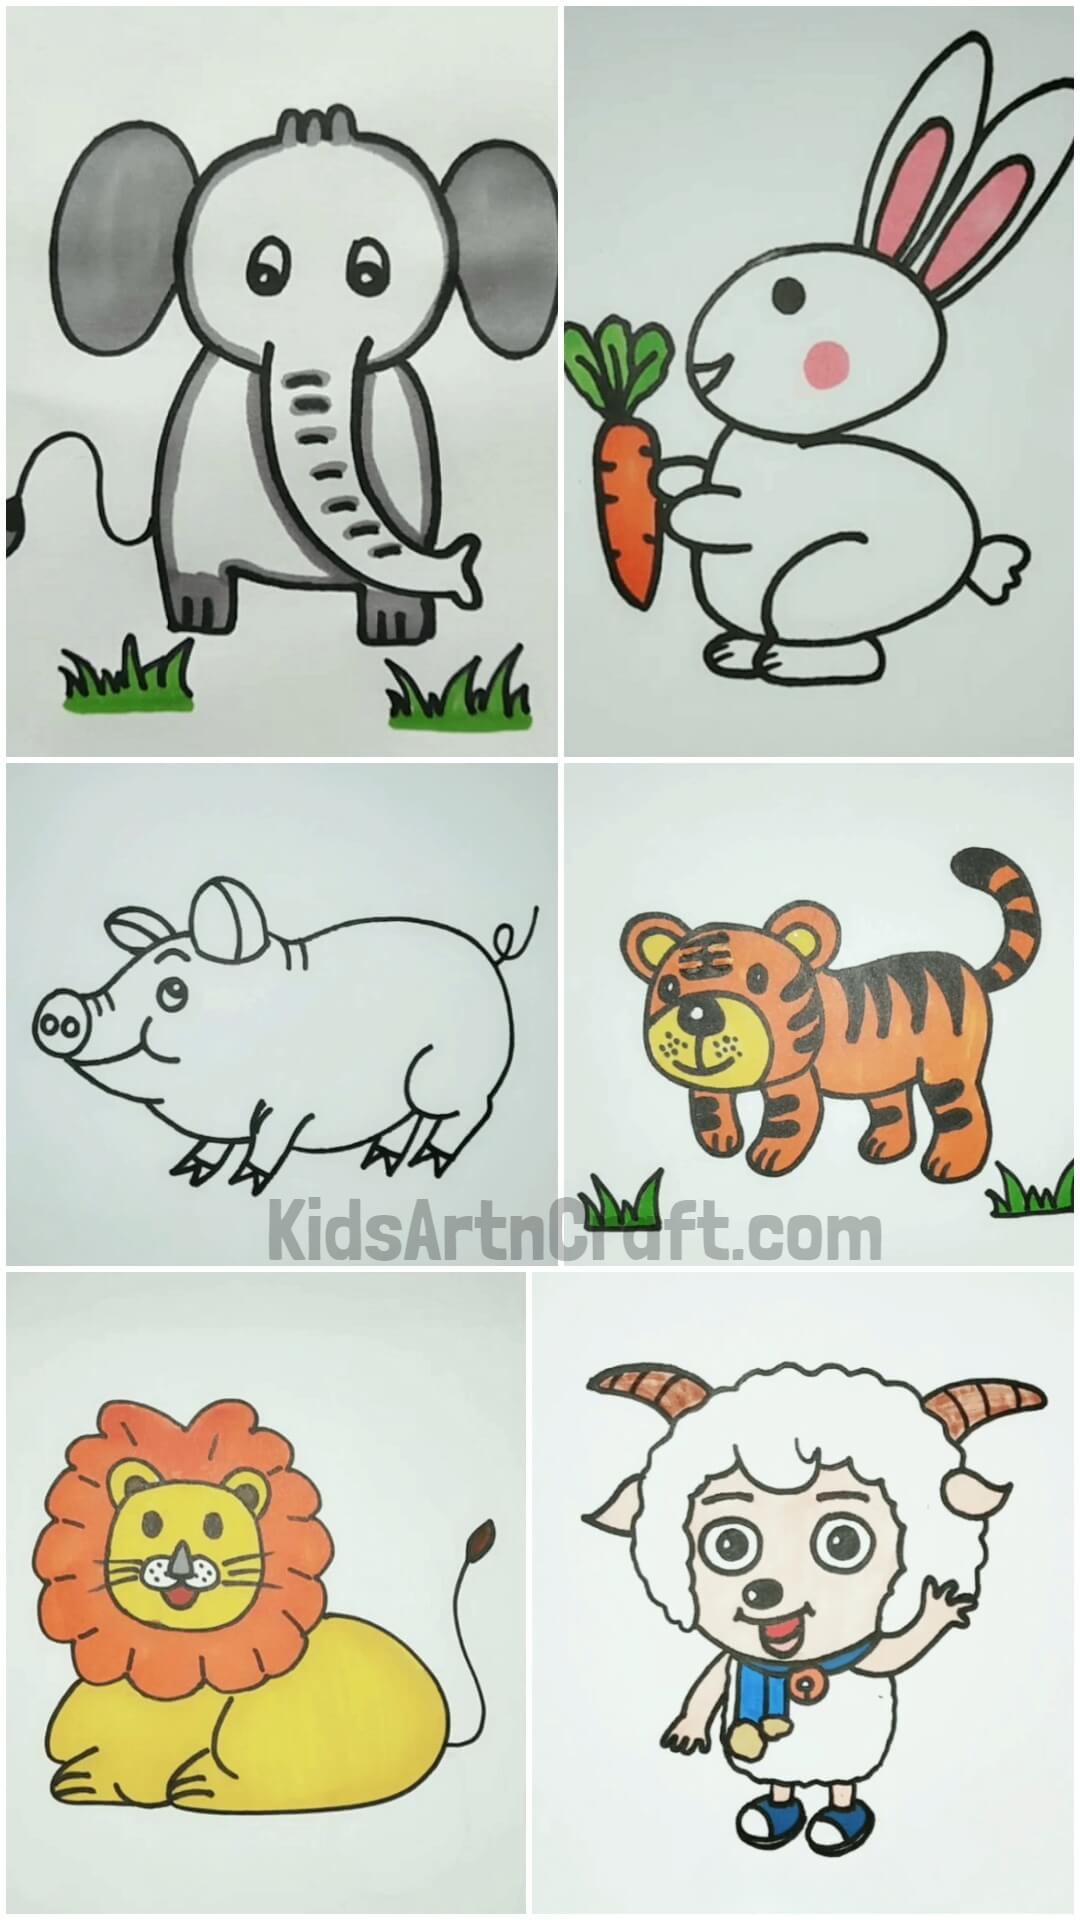 Easy animals drawing for kids - video Dailymotion-saigonsouth.com.vn